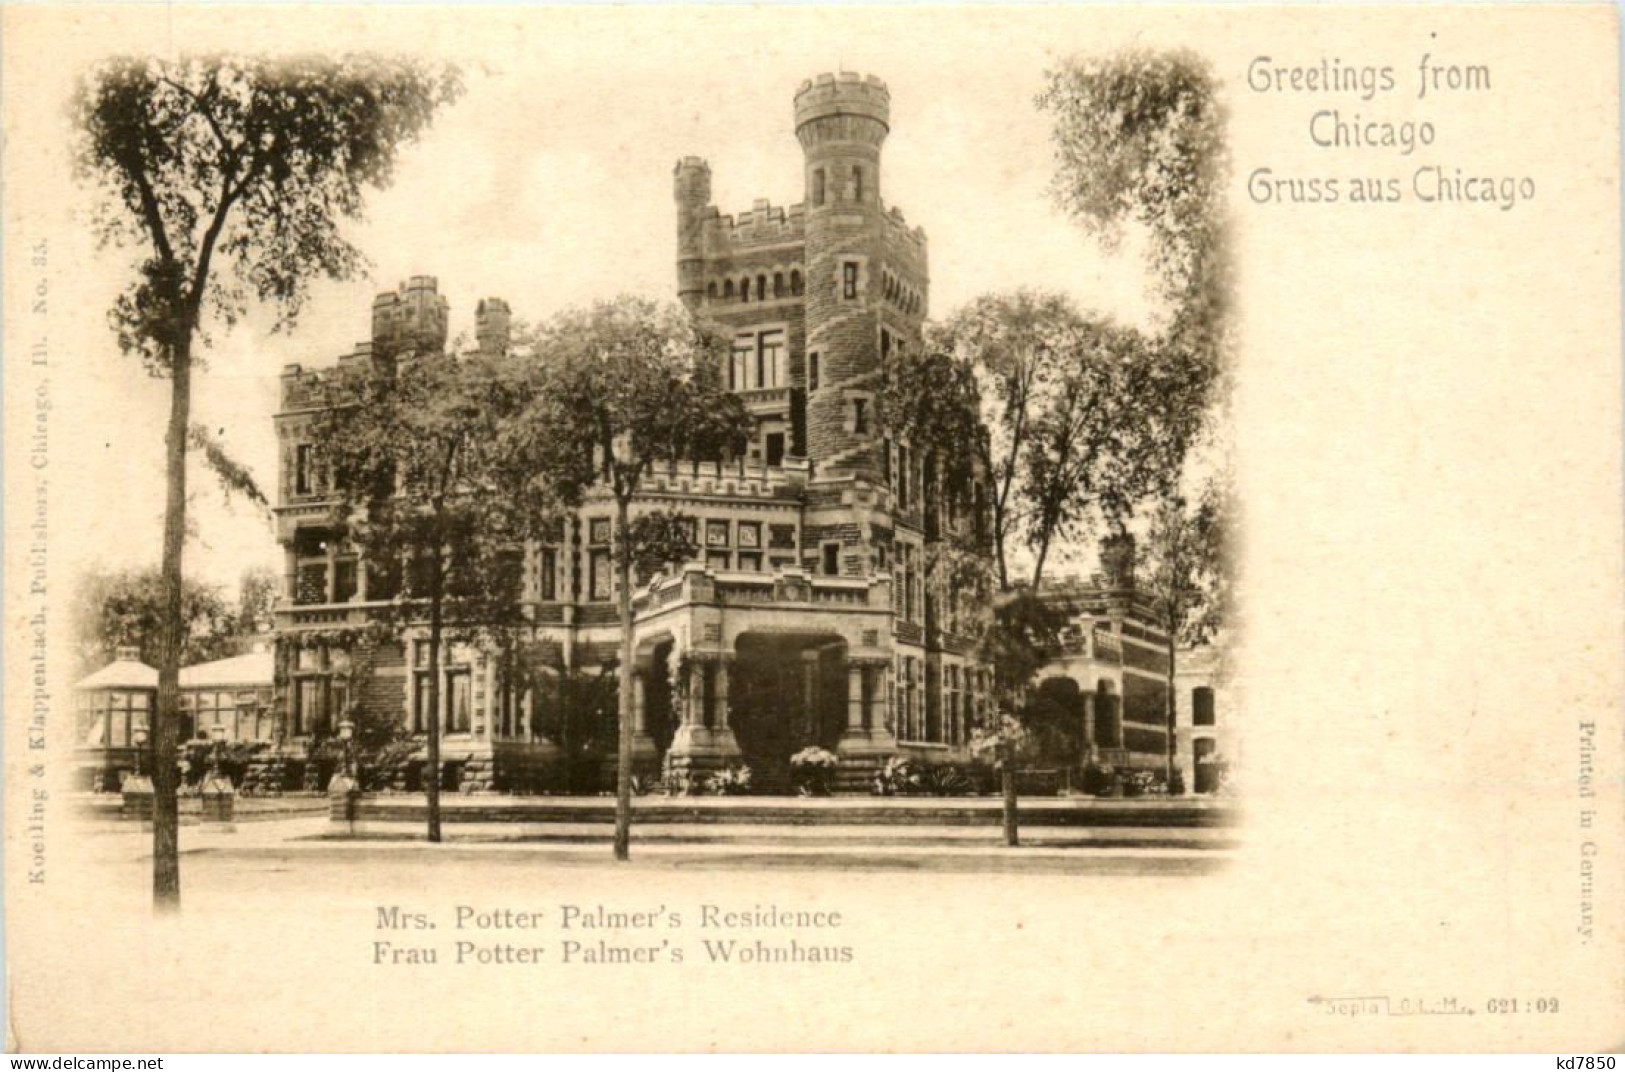 Greetings From Chicago - Mrs. Potter Palmers Residence - Chicago